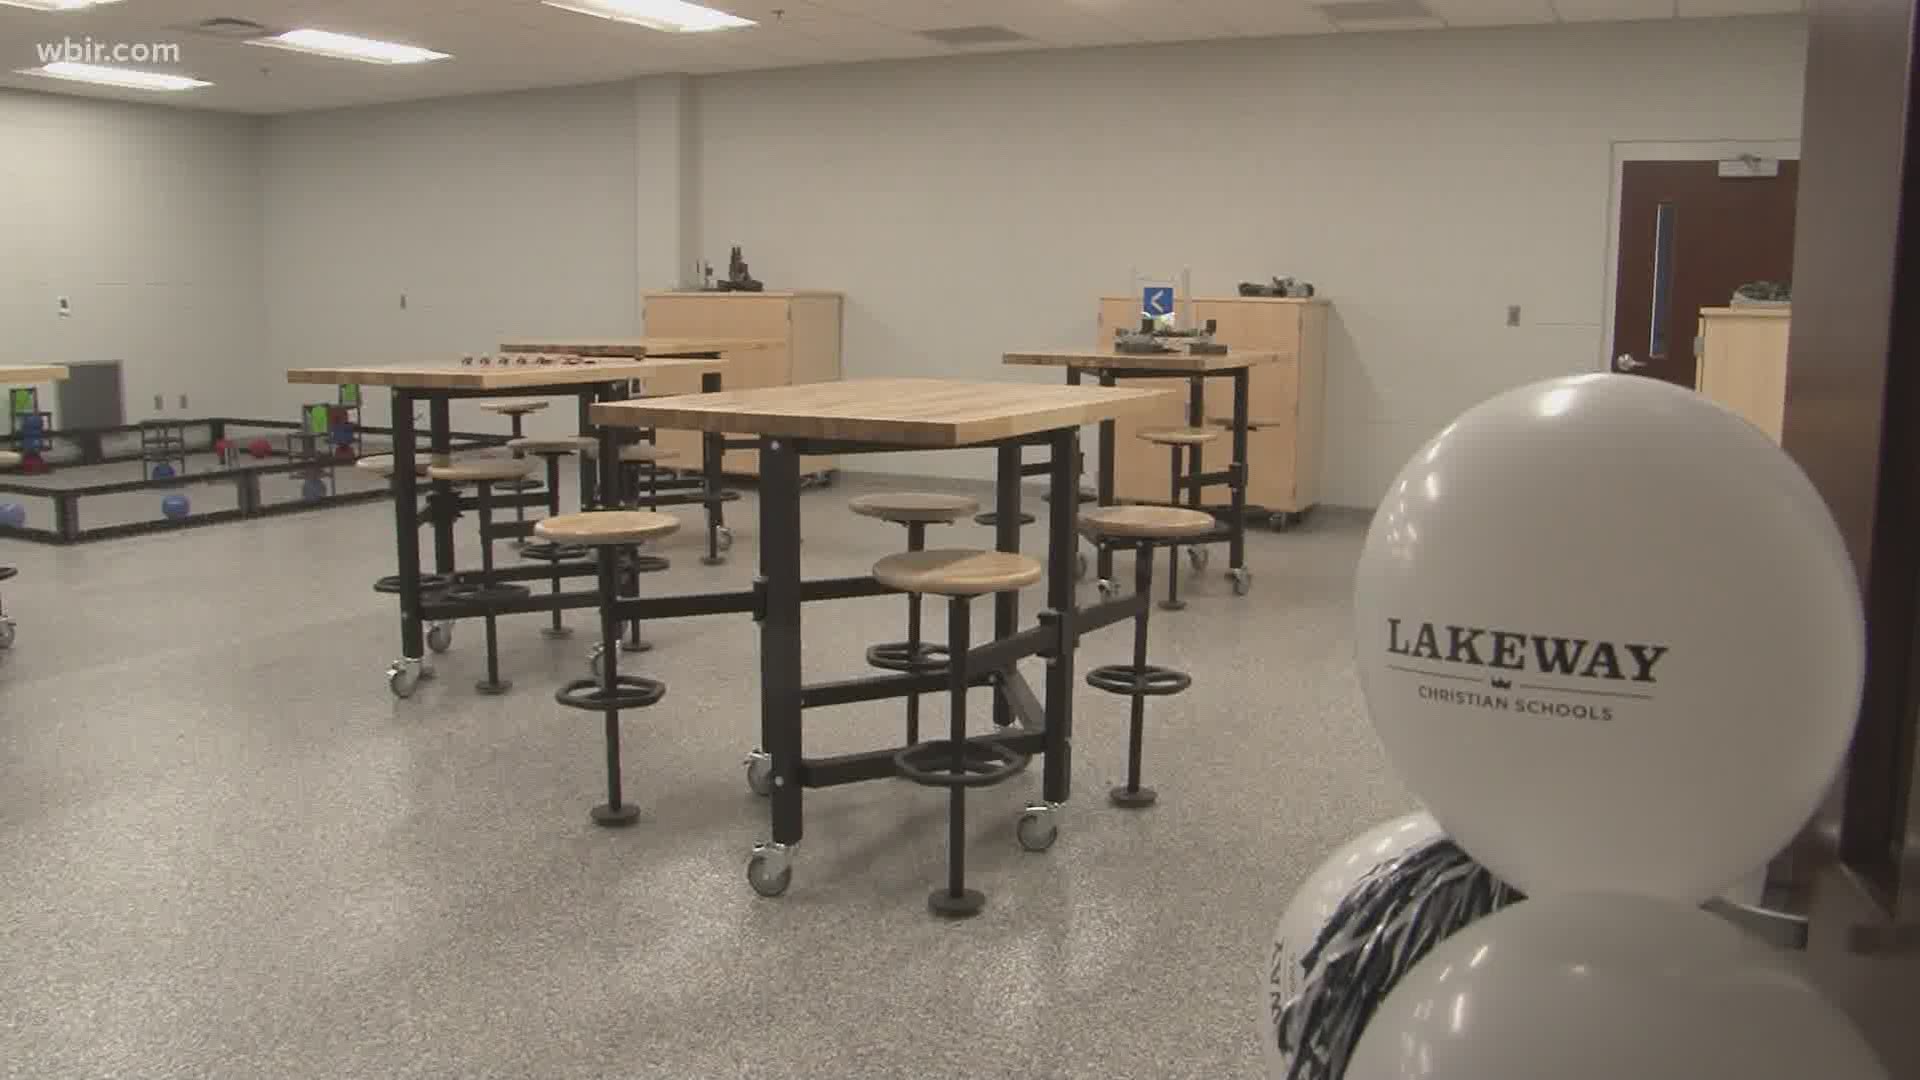 In Jefferson County, a new private school is opening its doors for the first time after years of construction, it is adapting as it gets ready to open its doors.